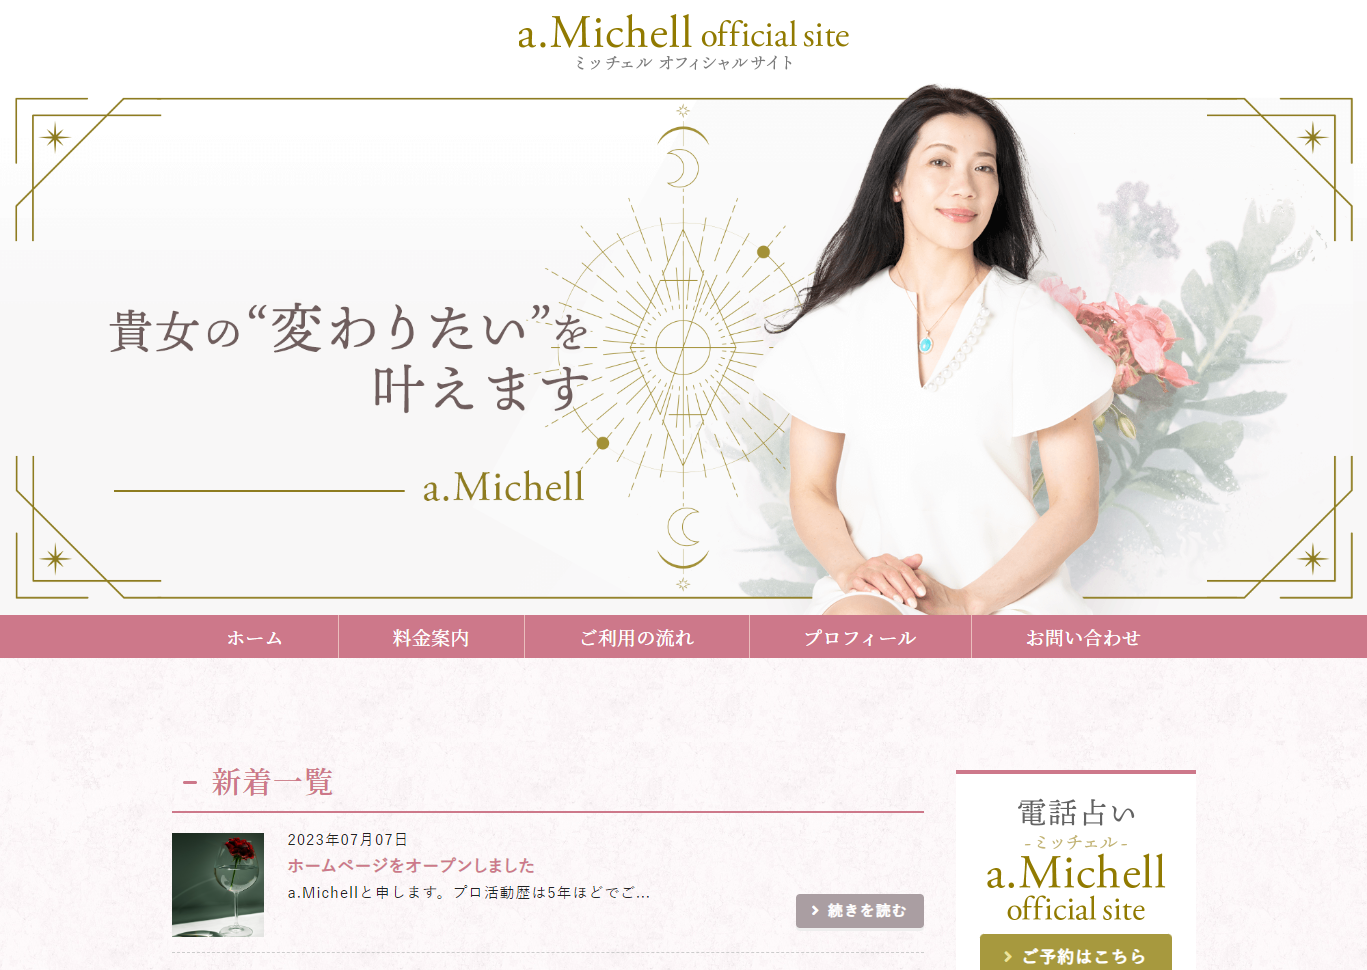 a.Michell（ミッチェル）